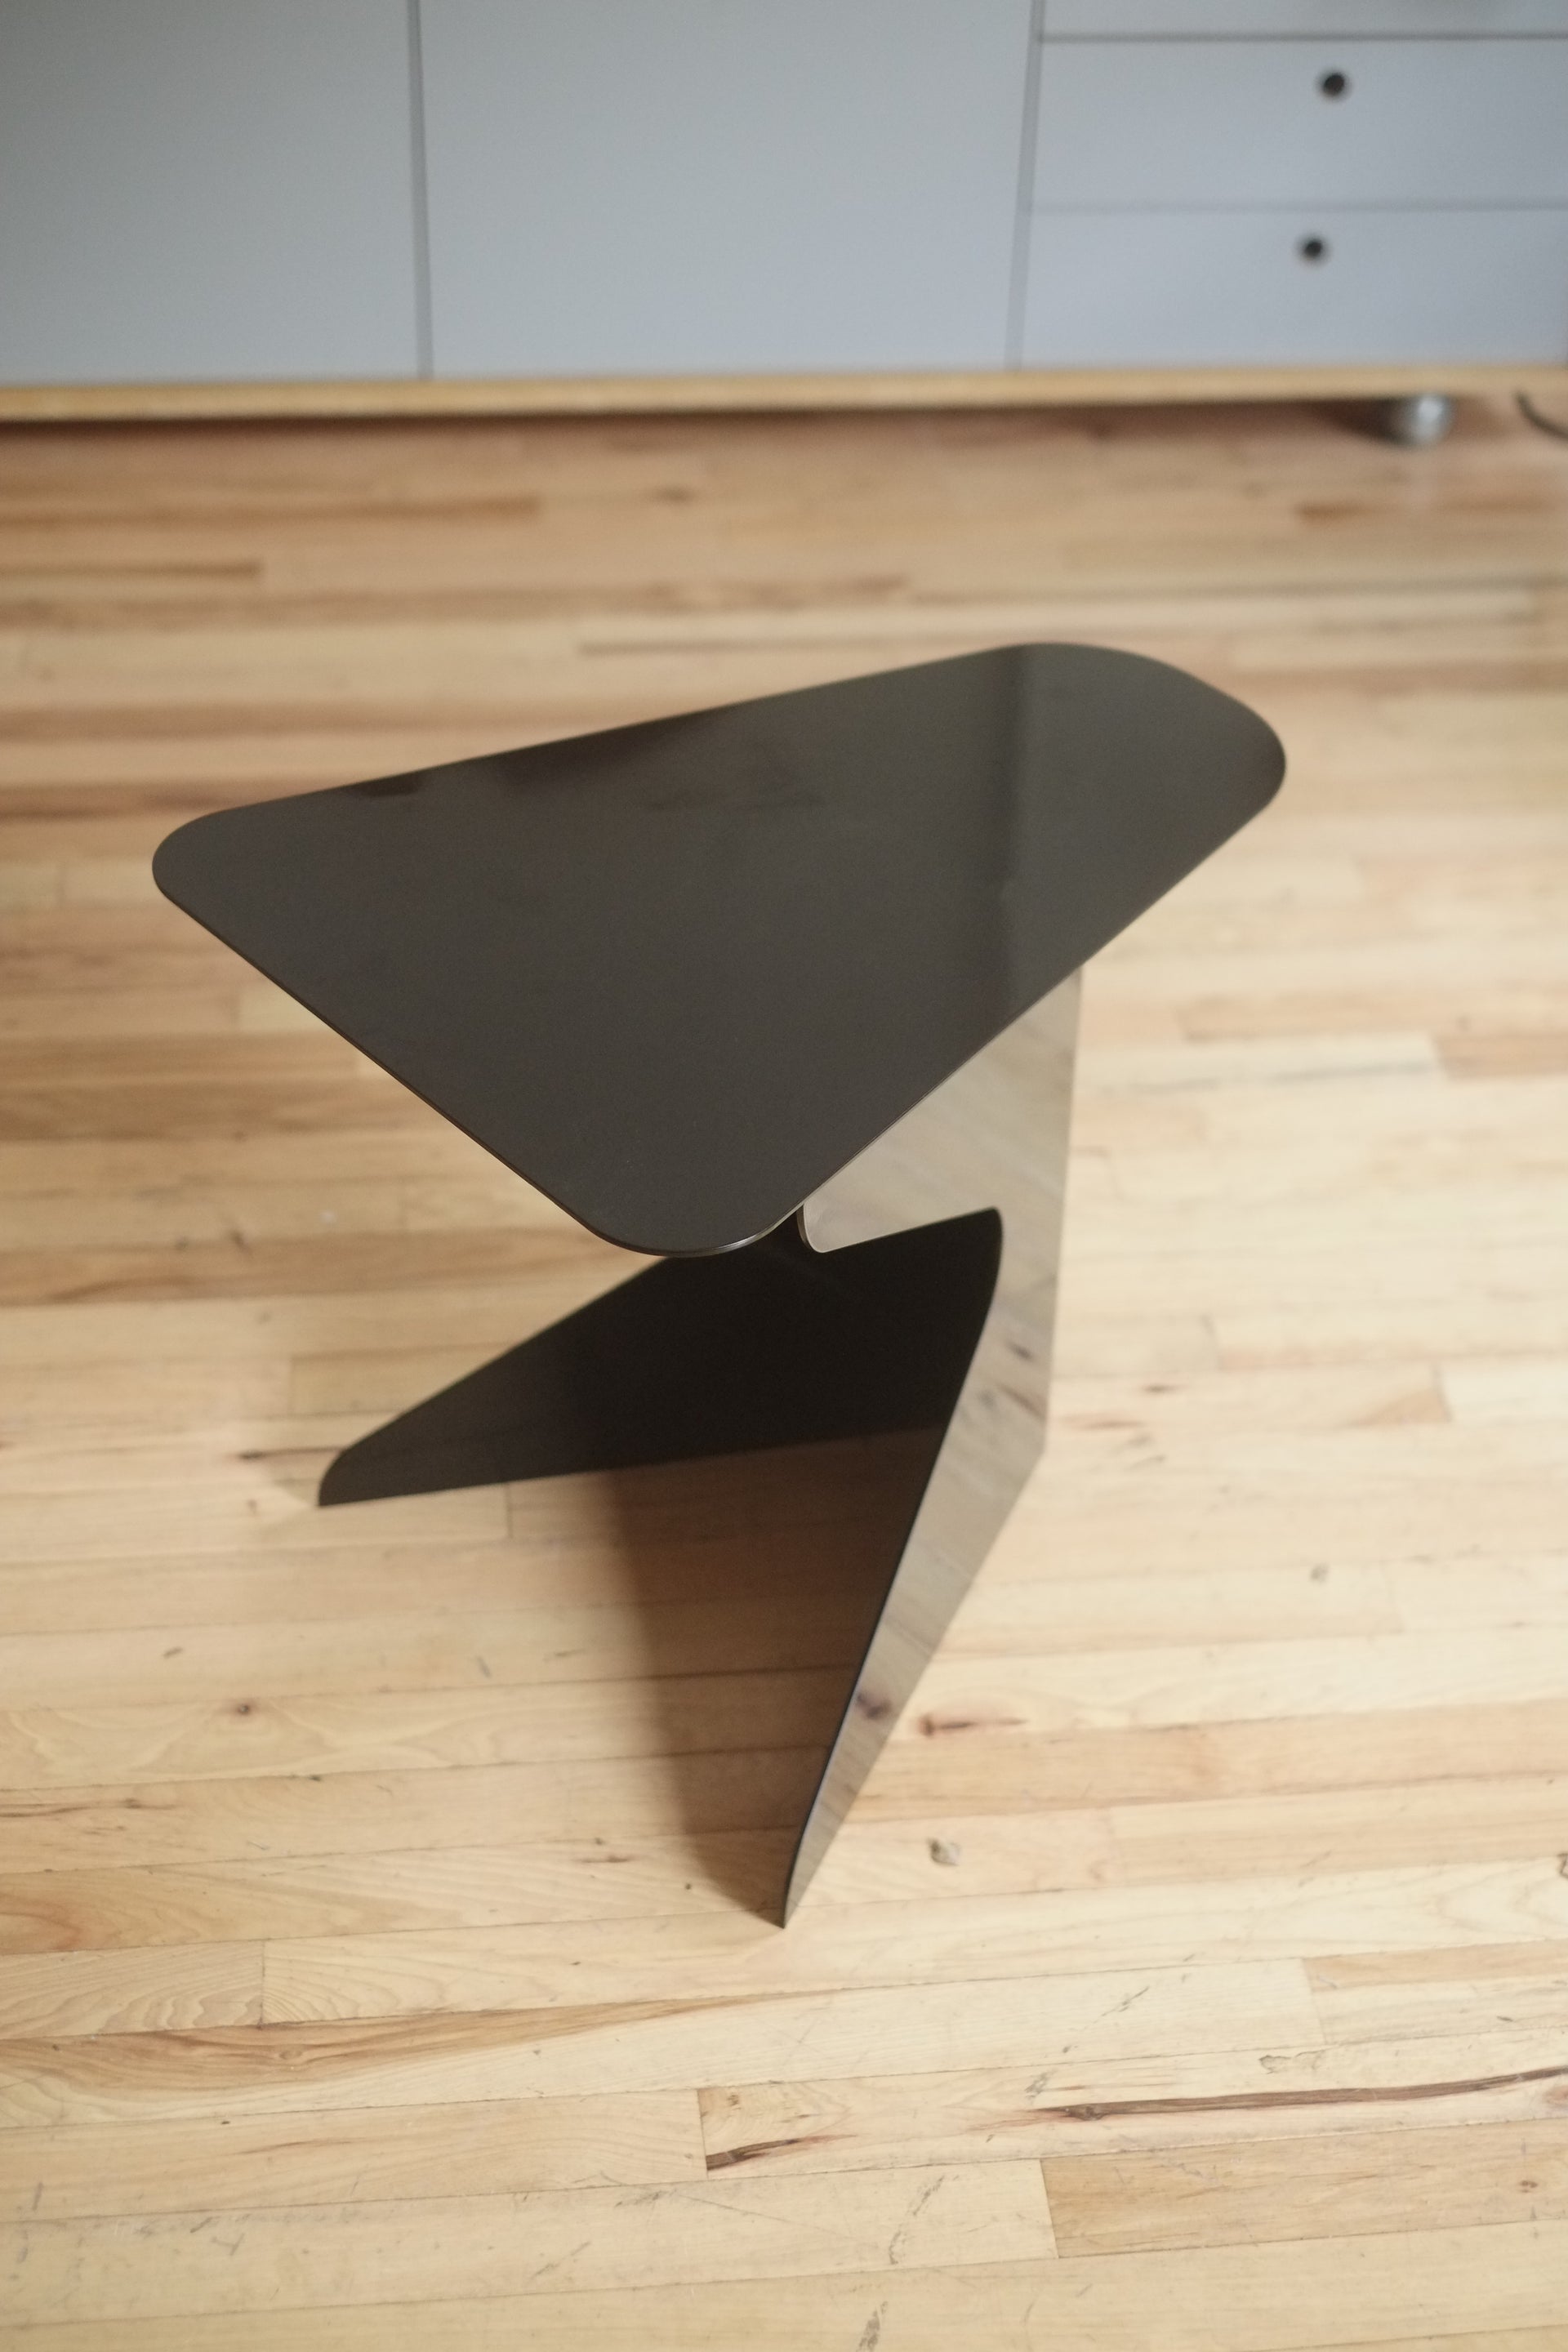 LM Stool by Nifemi-Marcus Bello (Black)